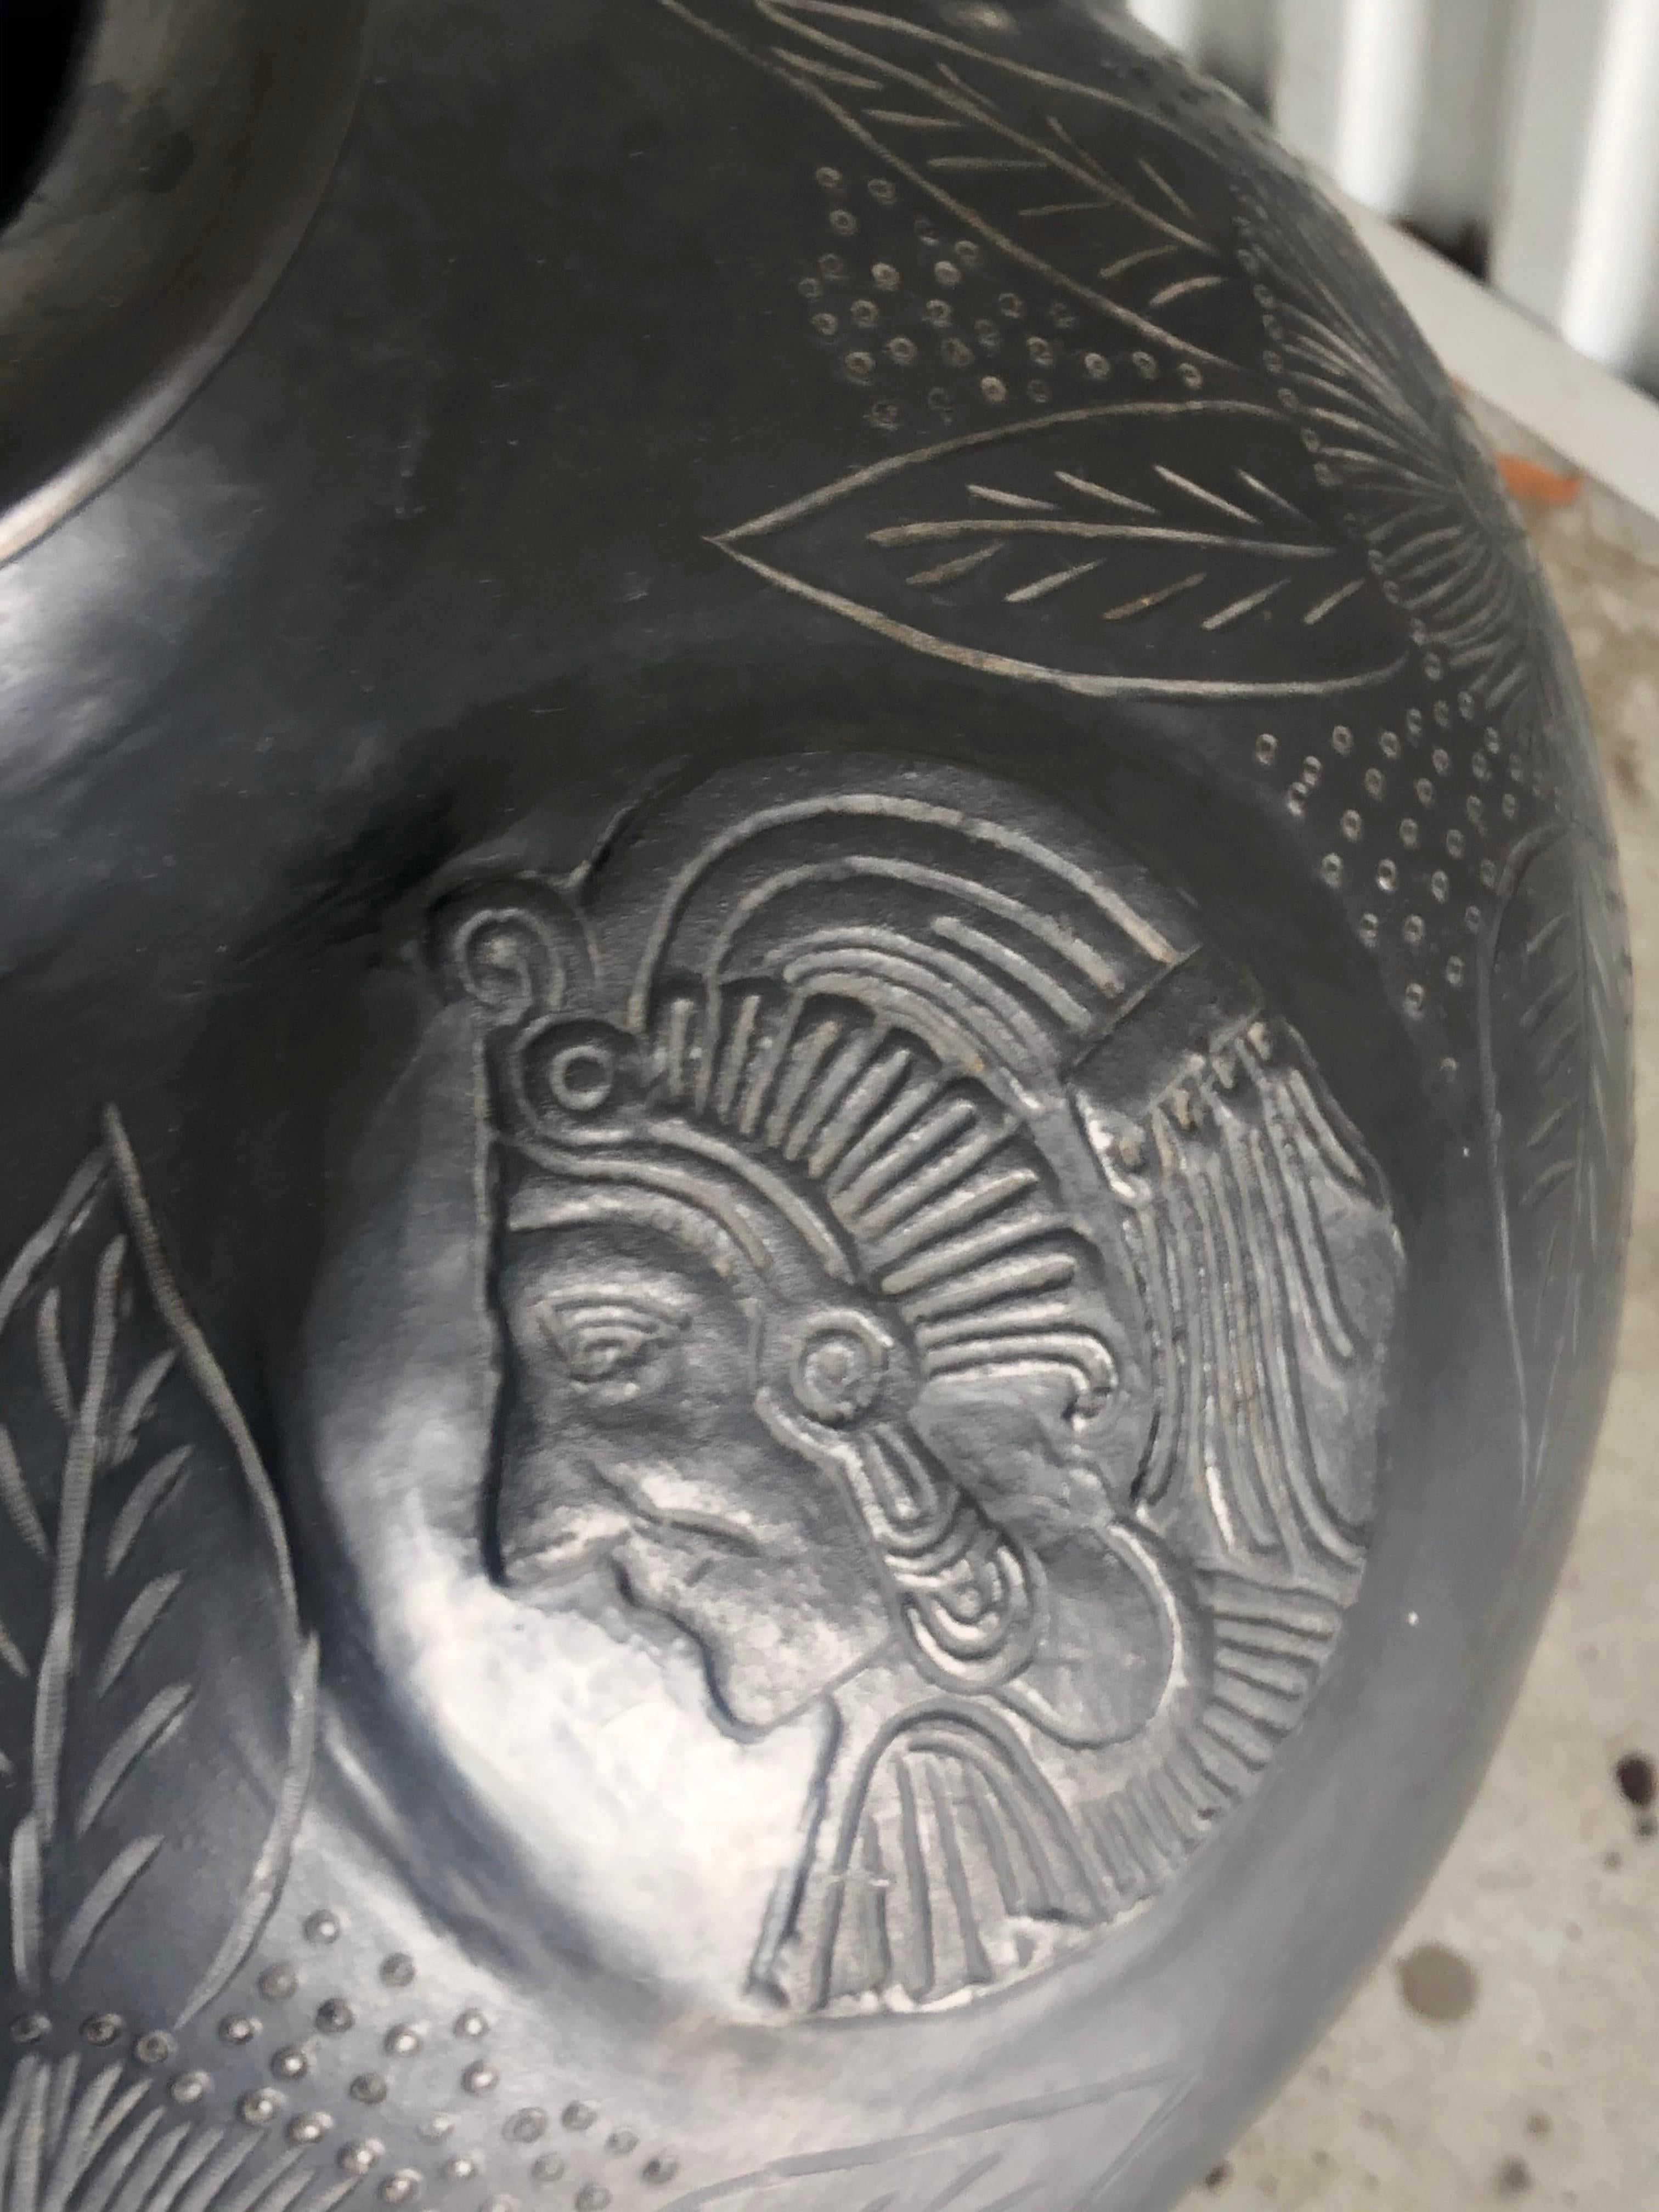 Amazing black pottery urn. In the manner of Pueblo pottery it has that famous sheen to the piece. Decorated with hand carved Indian heads and large flowers and leaves. Sits in a wrought iron ring. Acquired from a Wellington estate. 